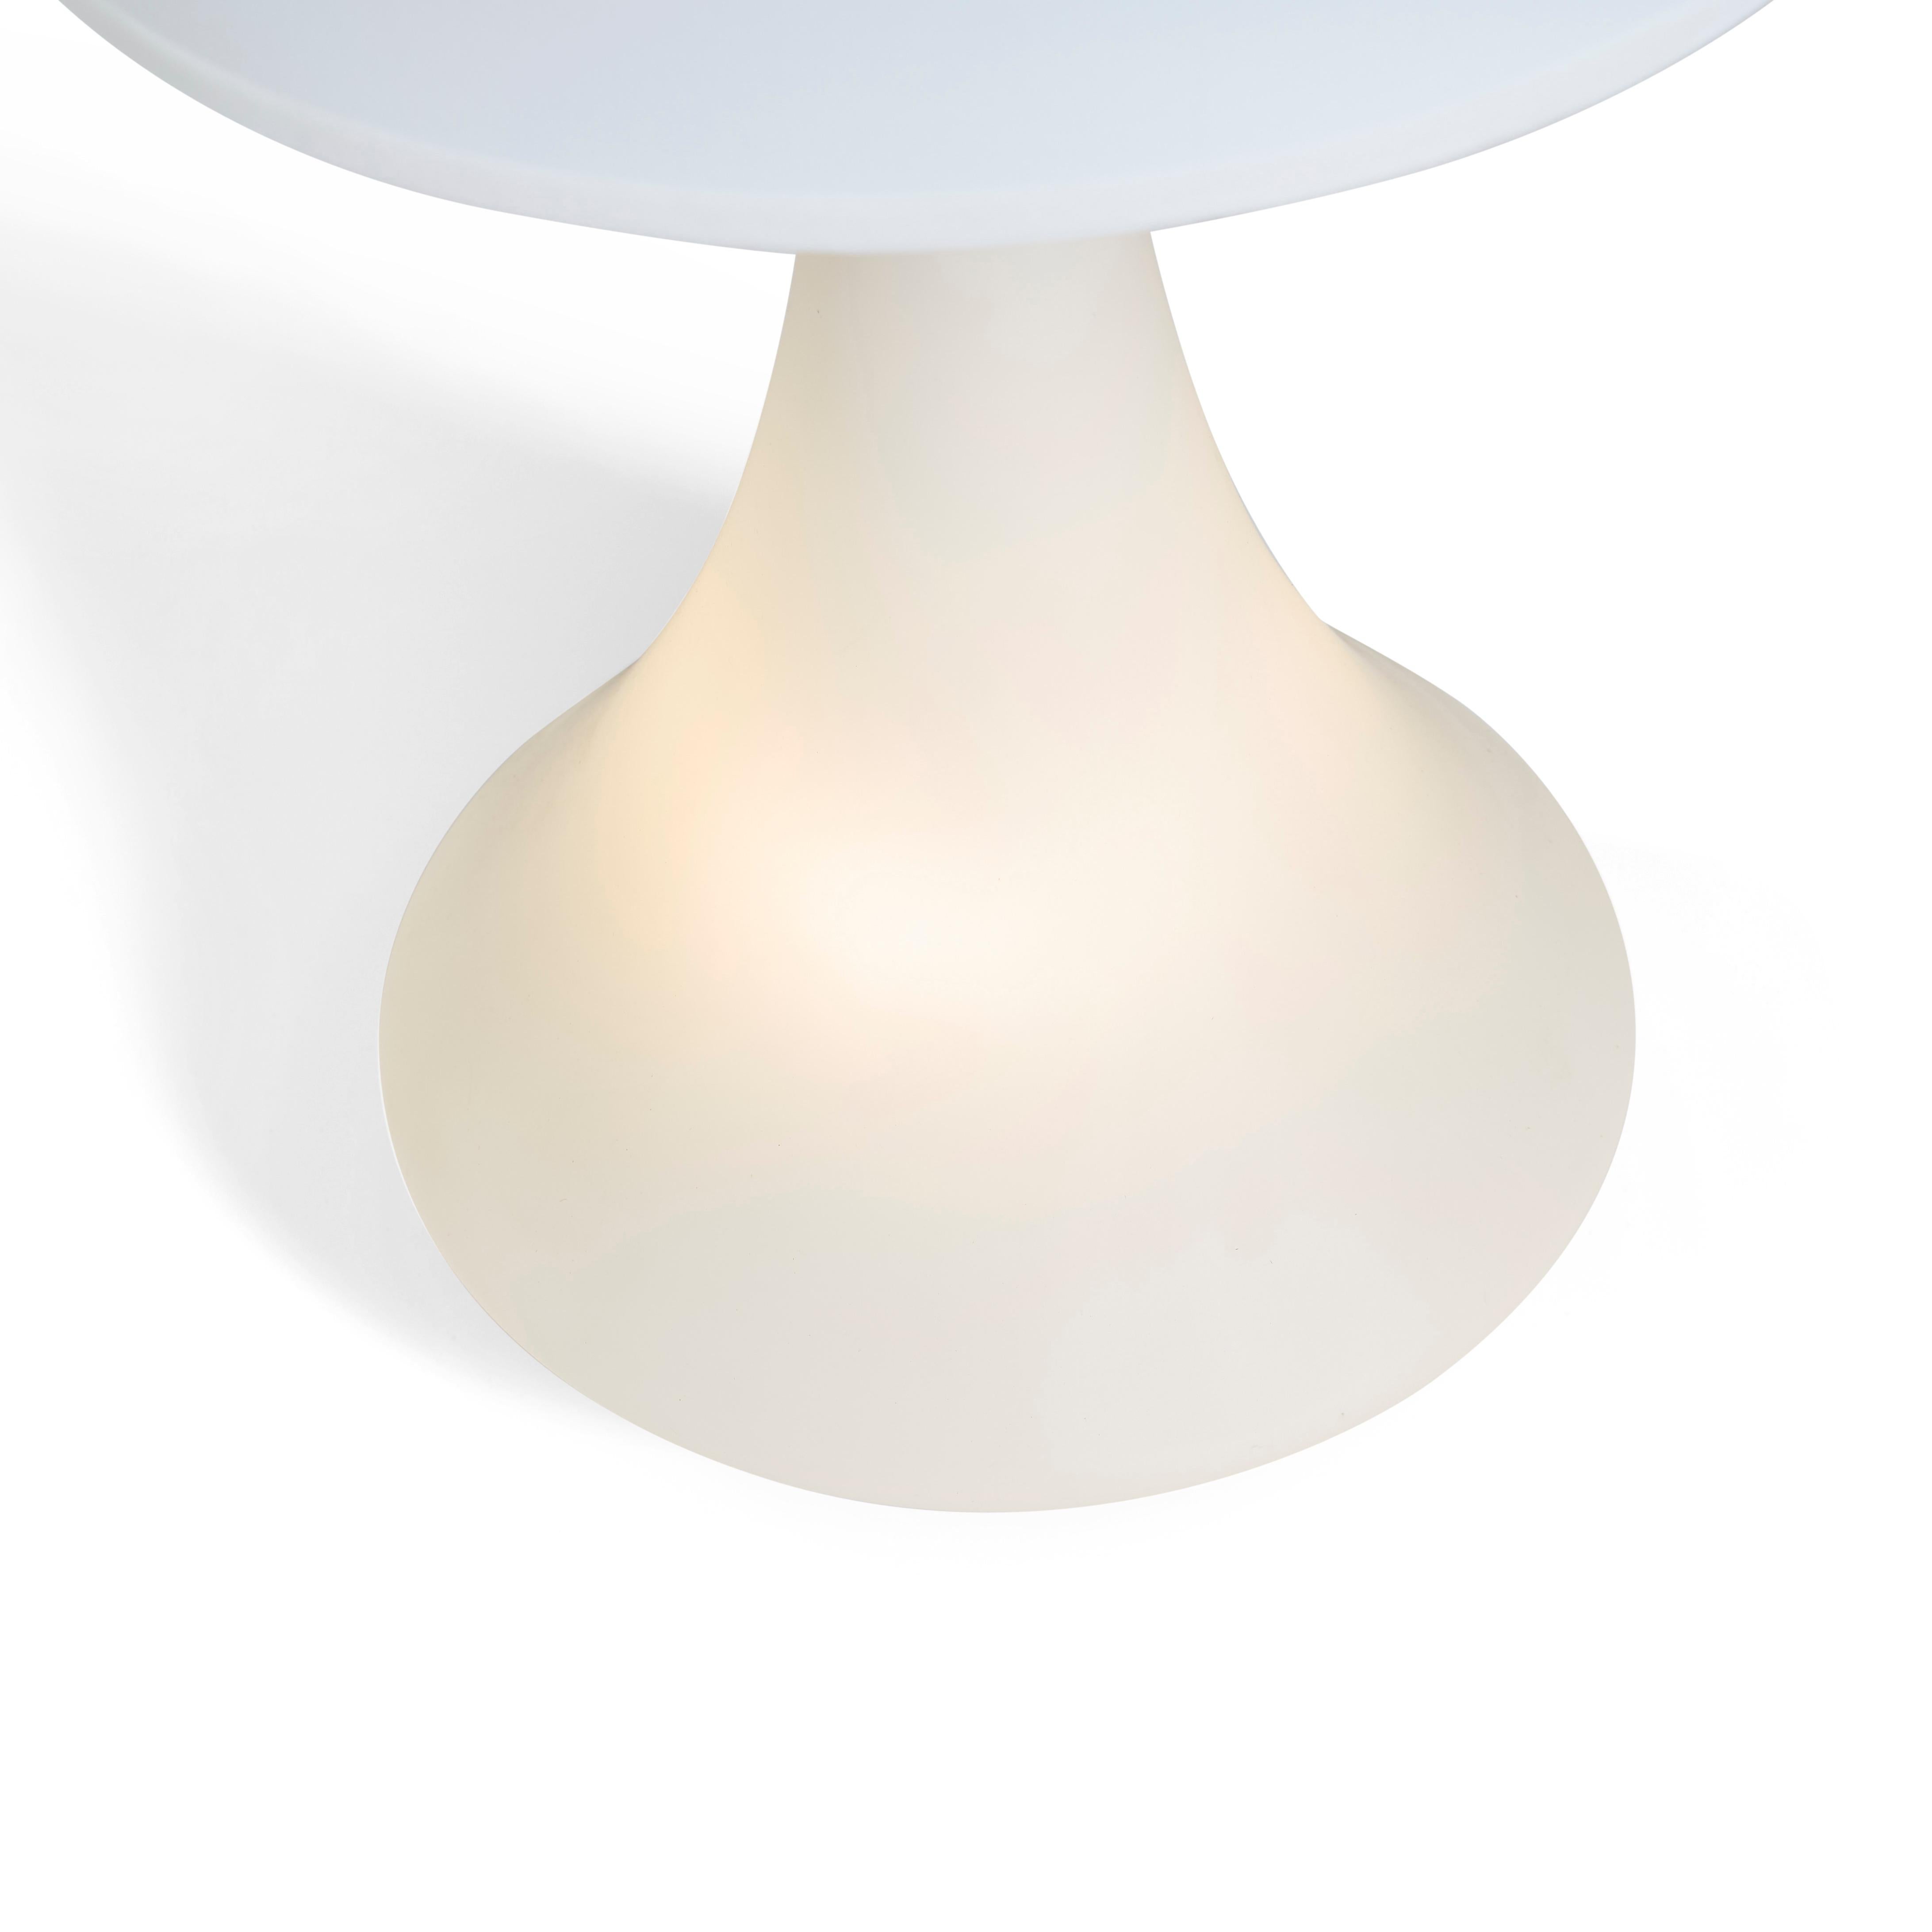 Mid-20th Century Italian Frosted Glass and Brass Lamp, circa 1950s For Sale